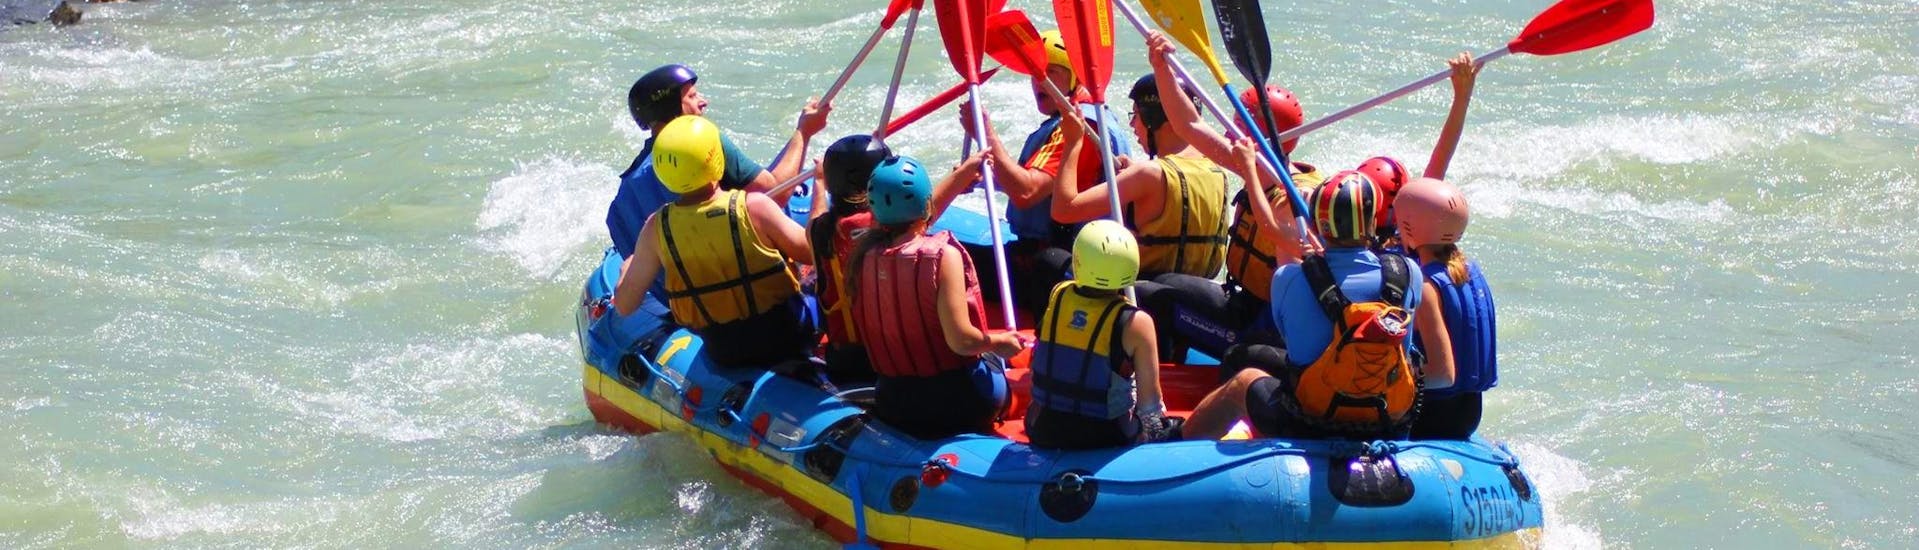 During the Rafting for Kids & Families on Salzach River in Taxenbach, a group of kids with their families is having fun on the river thanks due to their guide from Rafting Center Taxenbach.